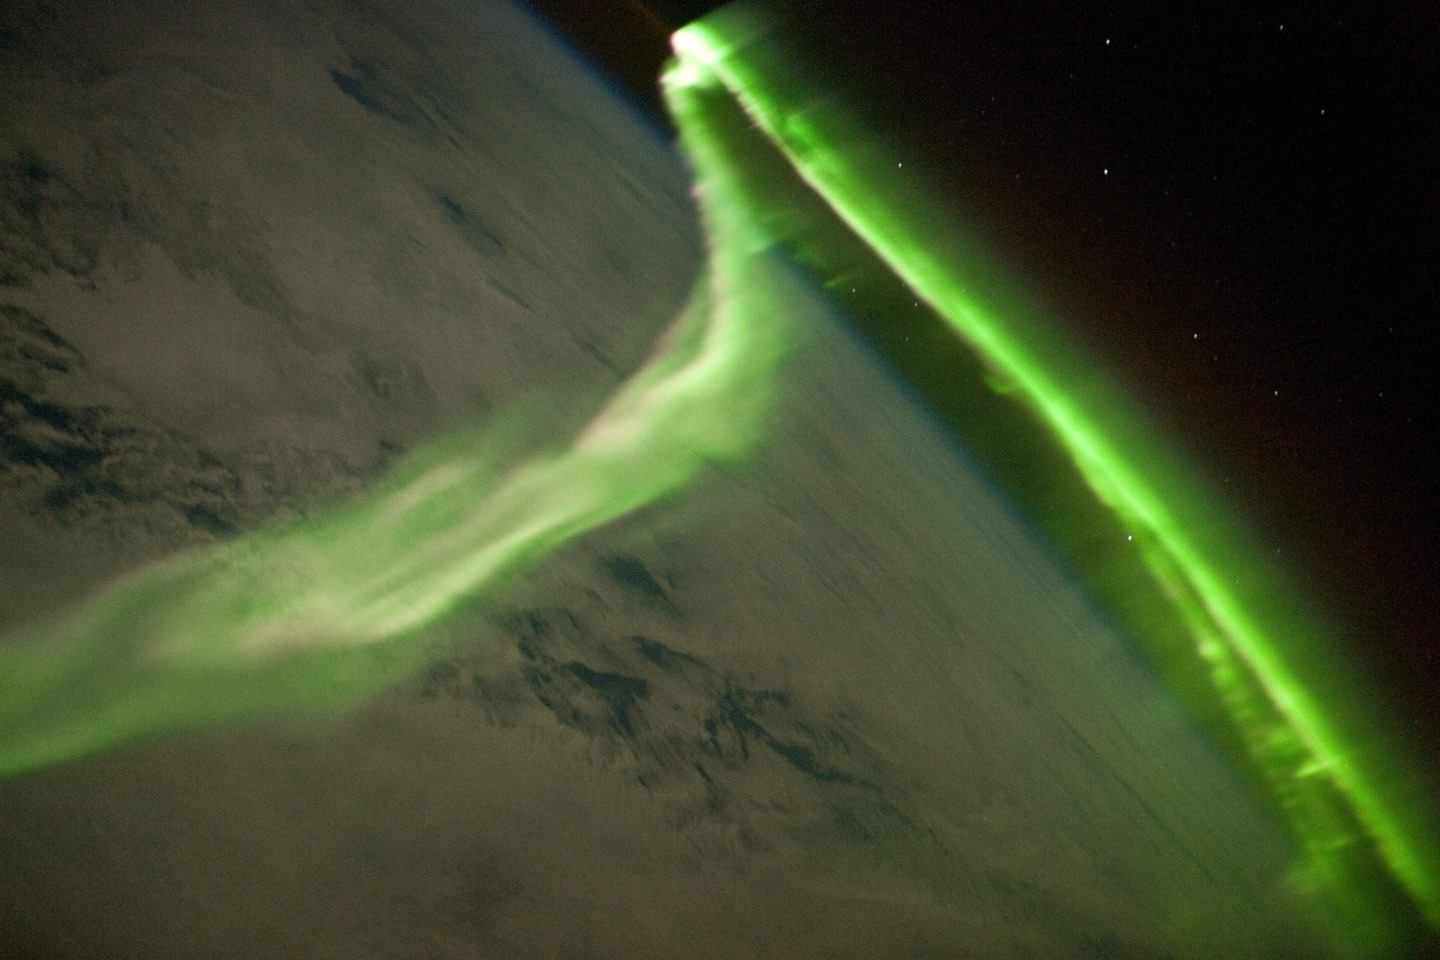 ISS Crew Captures Beautiful Image of Green Aurora Over the Indian Ocean